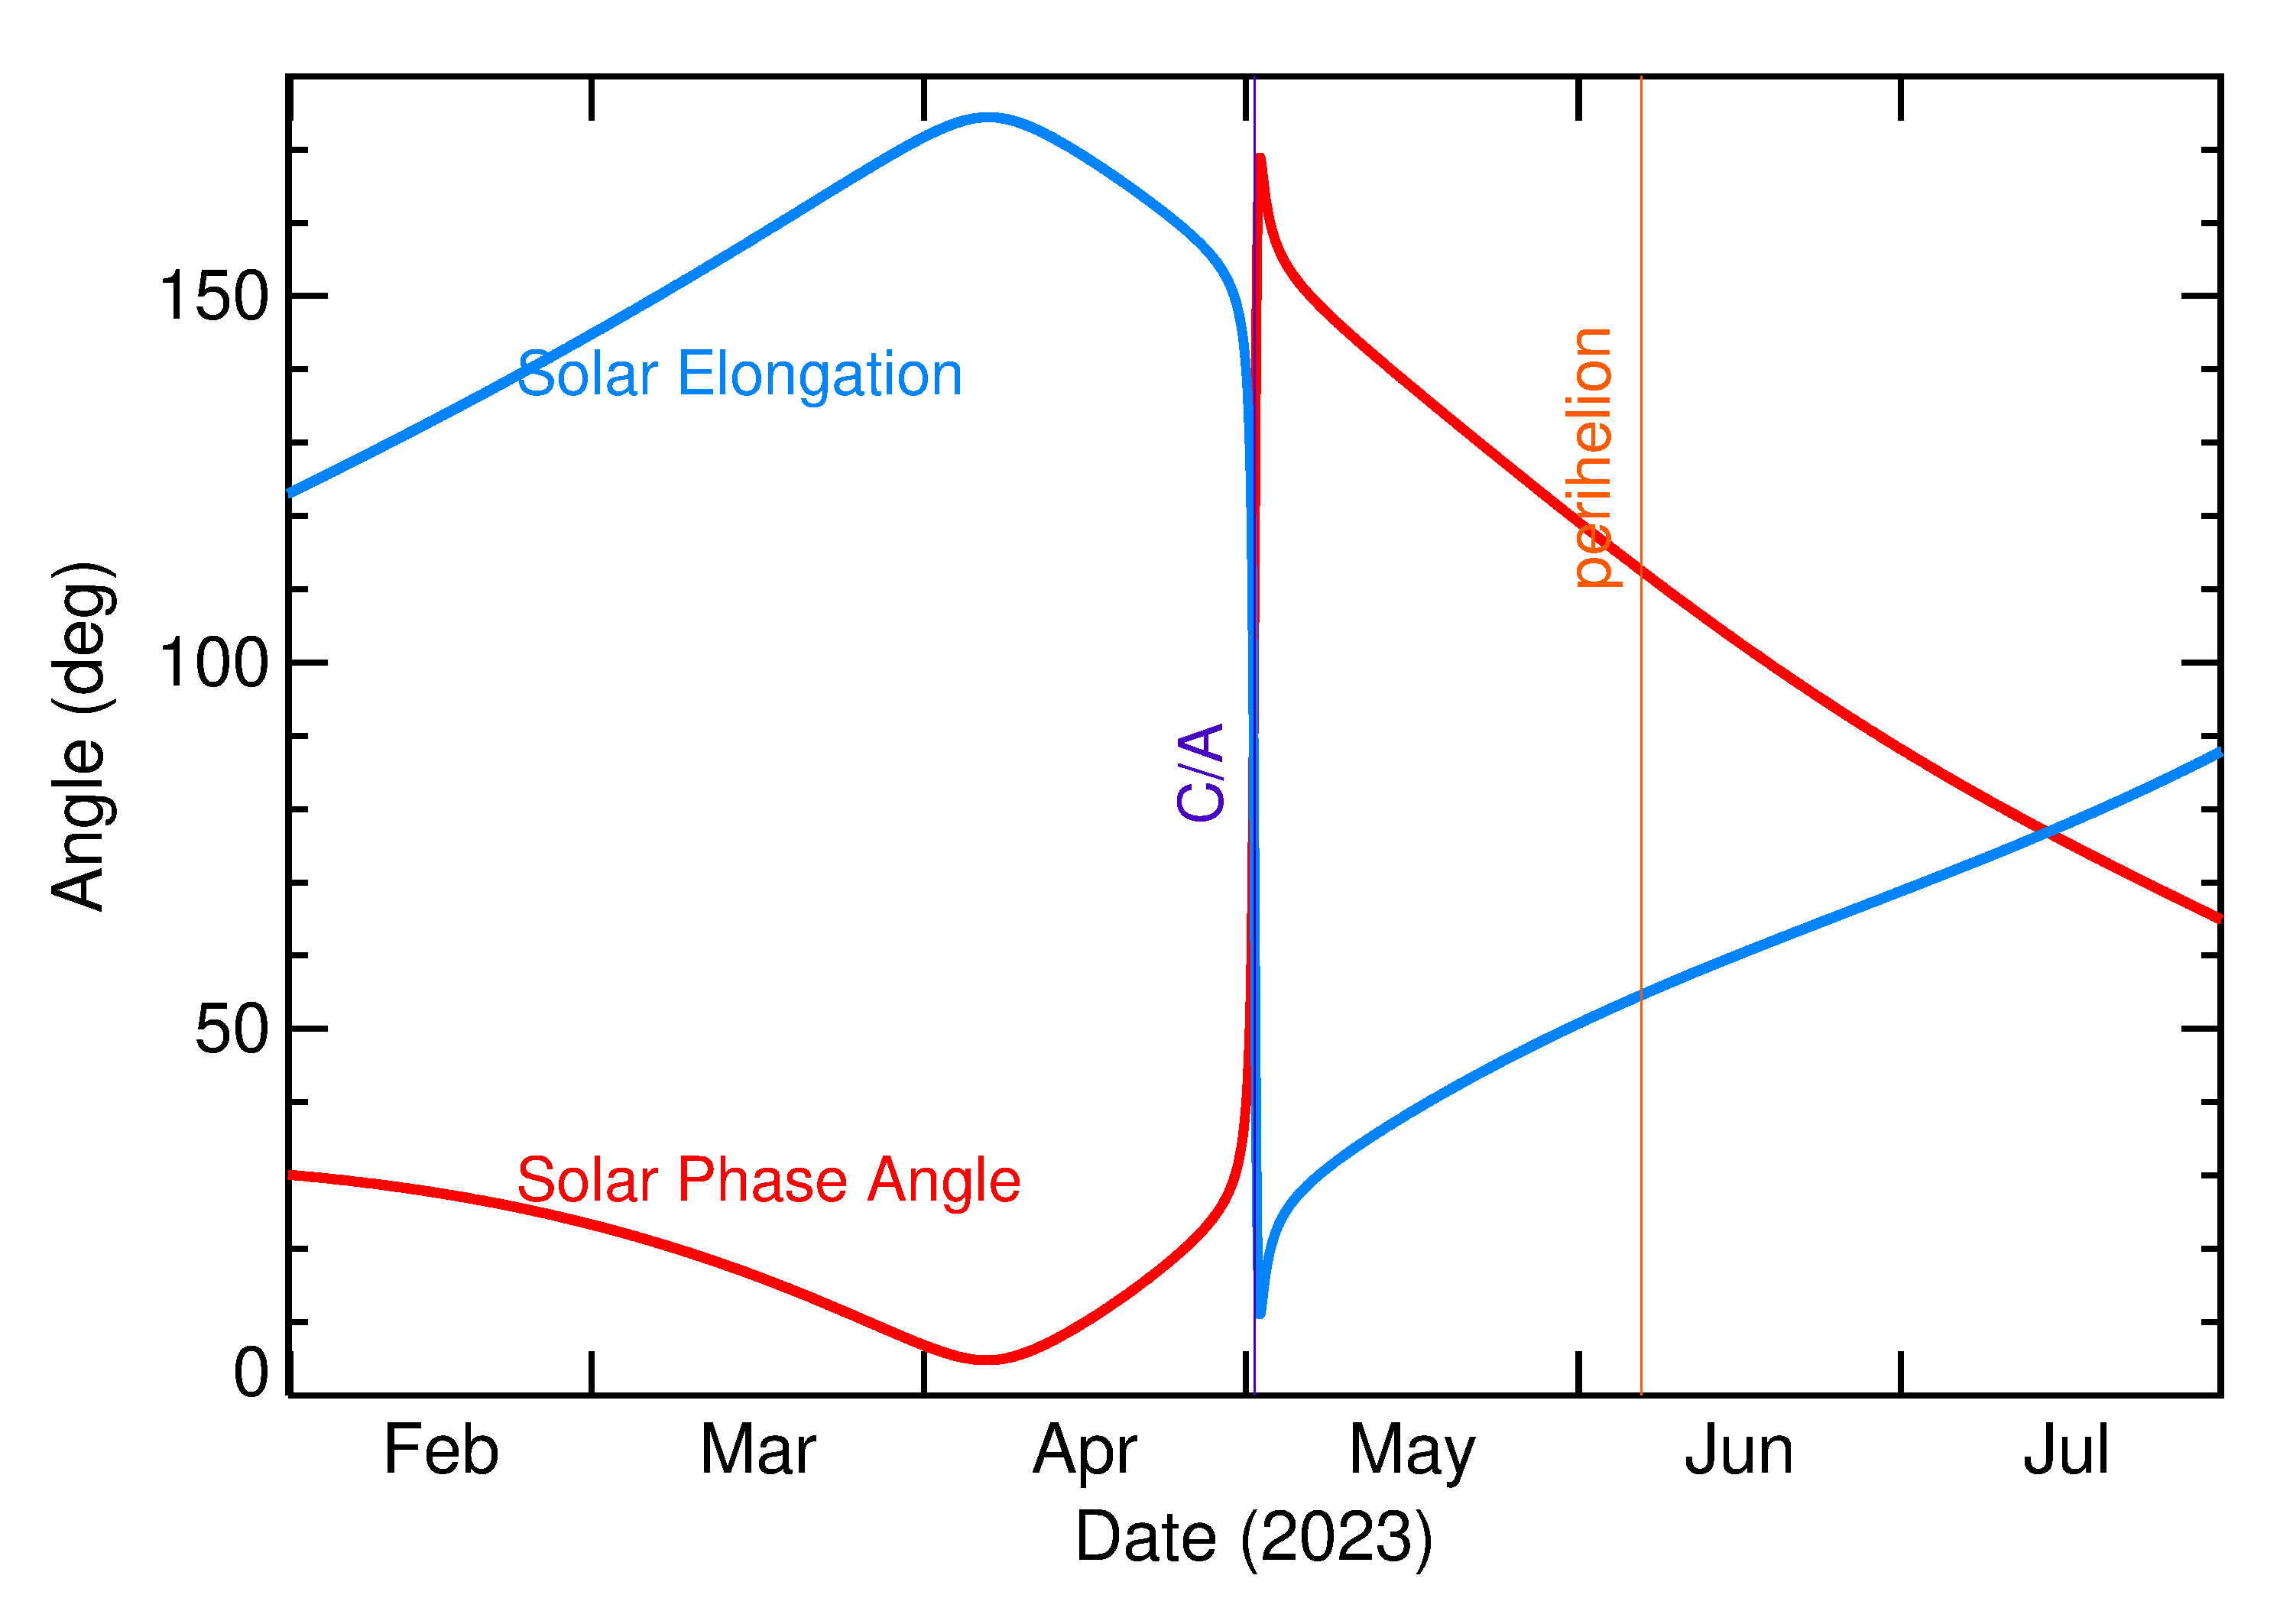 Solar Elongation and Solar Phase Angle of 2023 HD7 in the months around closest approach